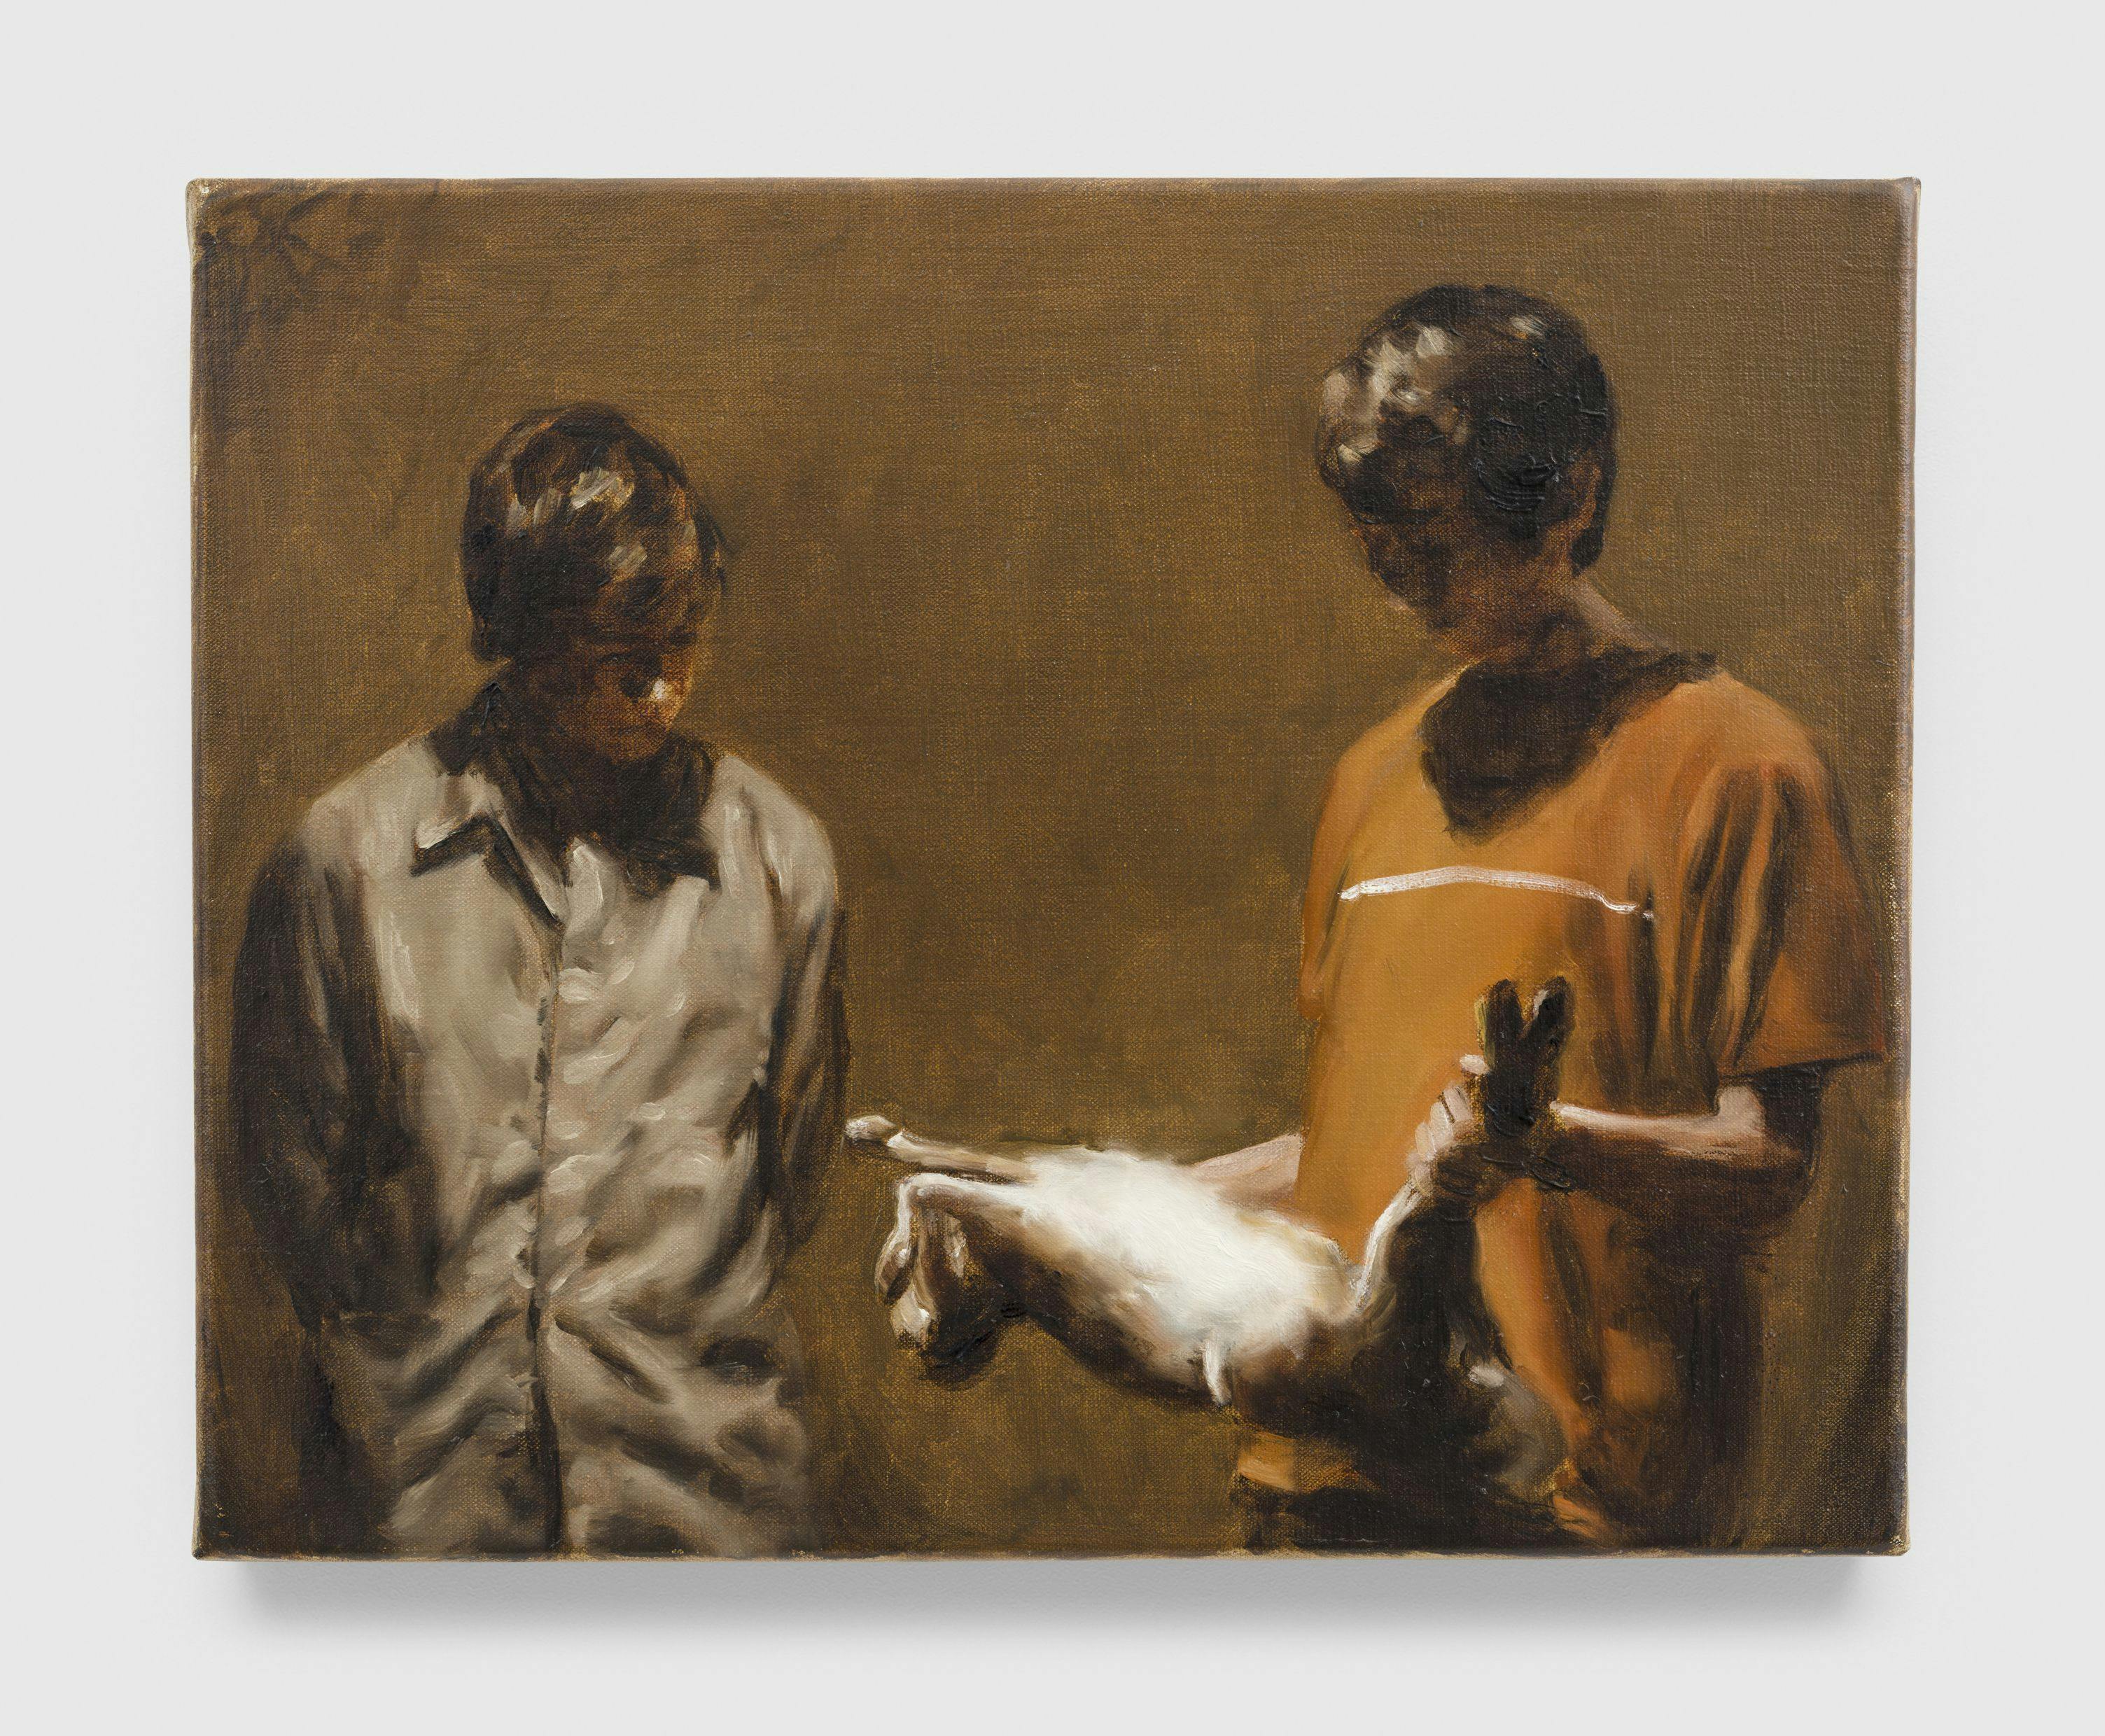 A painting by Michaël Borremans, titled The Hare, dated 2005.